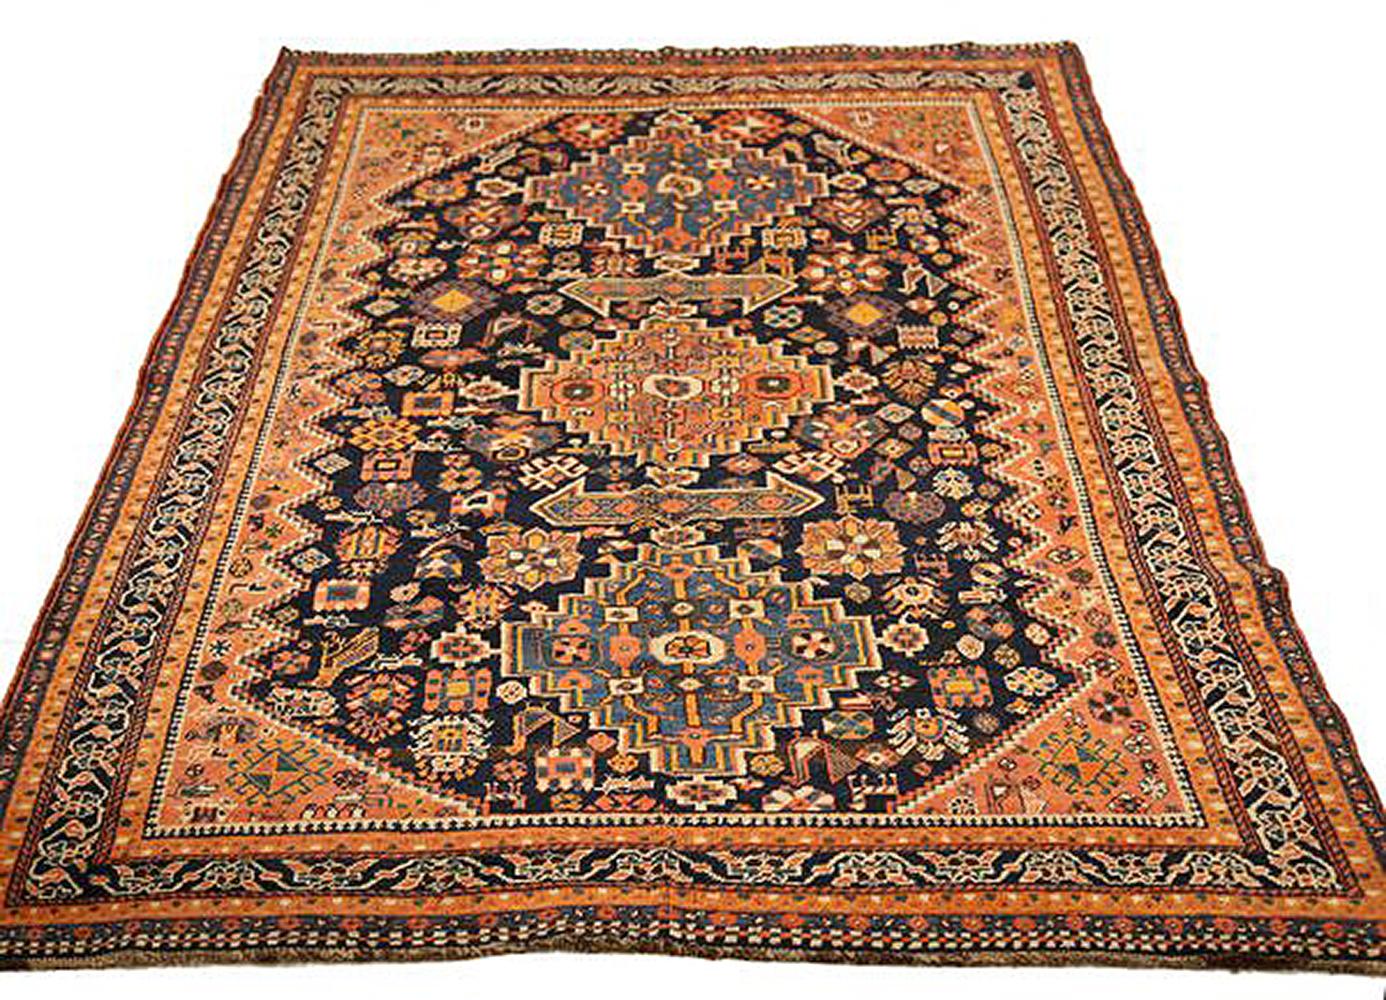 Antique Persian rug handwoven from the finest sheep’s wool and colored with all-natural vegetable dyes that are safe for humans and pets. It’s a traditional Shiraz design featuring blue, orange, and gray floral and geometric details over a black and